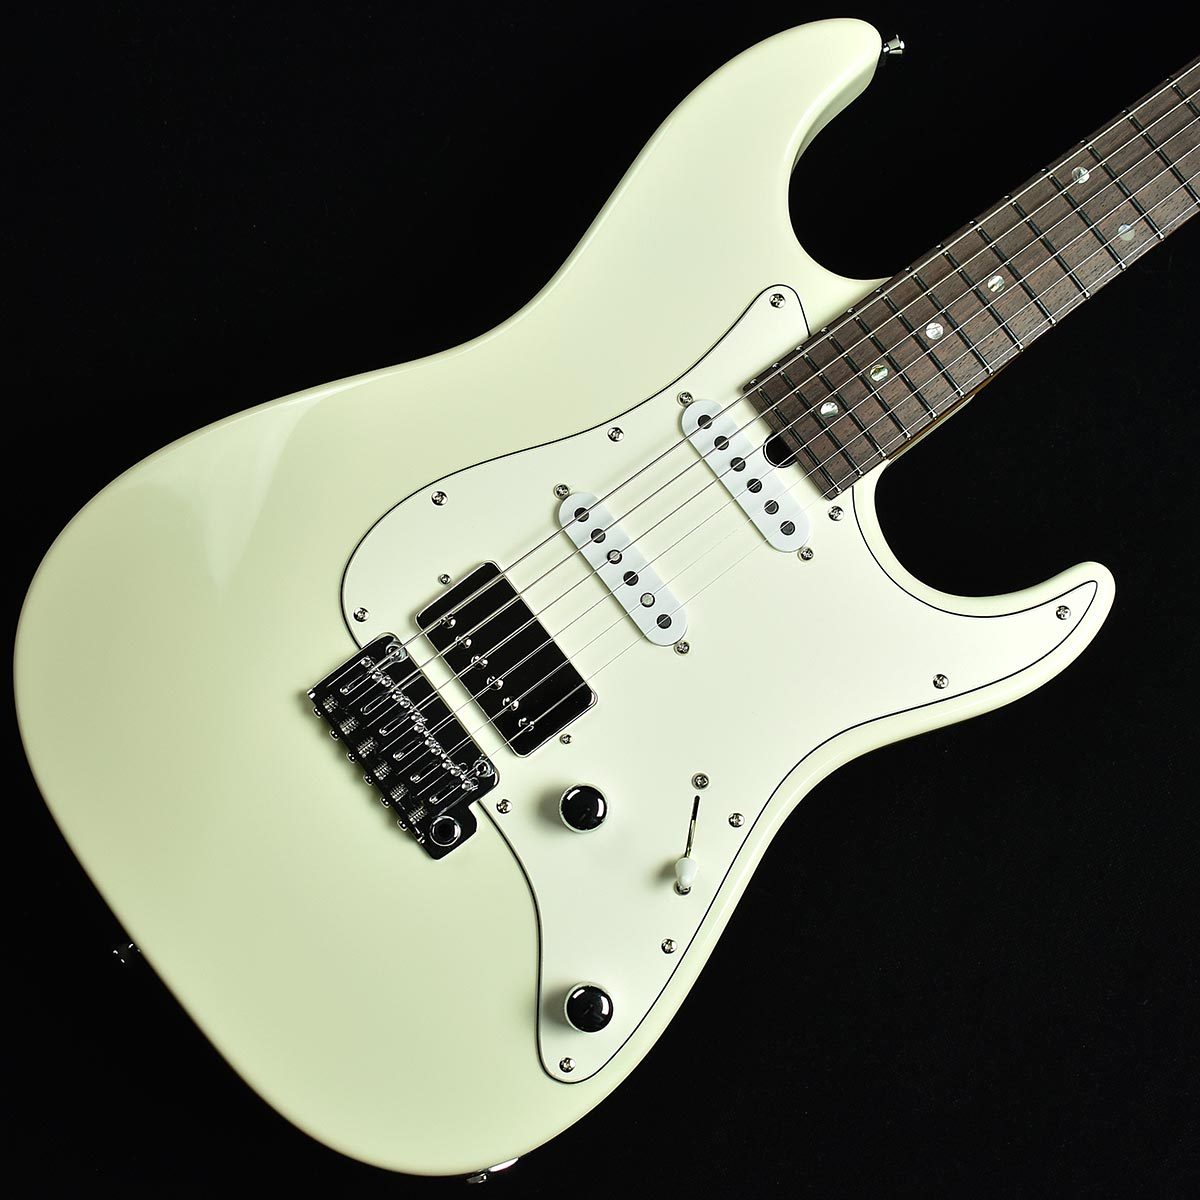 T's Guitar DST-Classic22 Roasted Flame Maple Neck Vintage White (福岡パルコ店) 